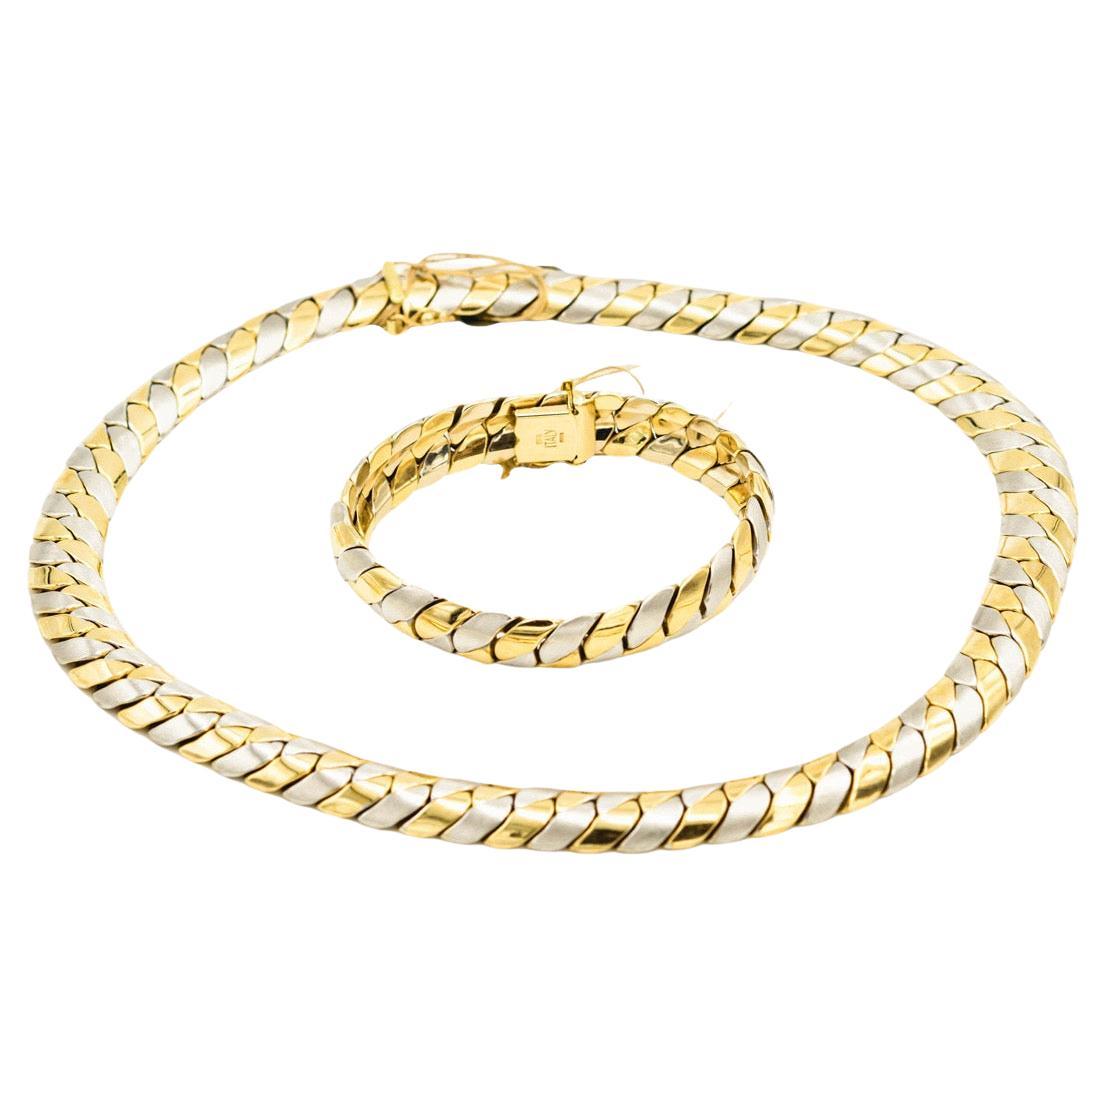 Two Tone Yellow and White Gold Italian Braid Necklace & Bracelet Suite